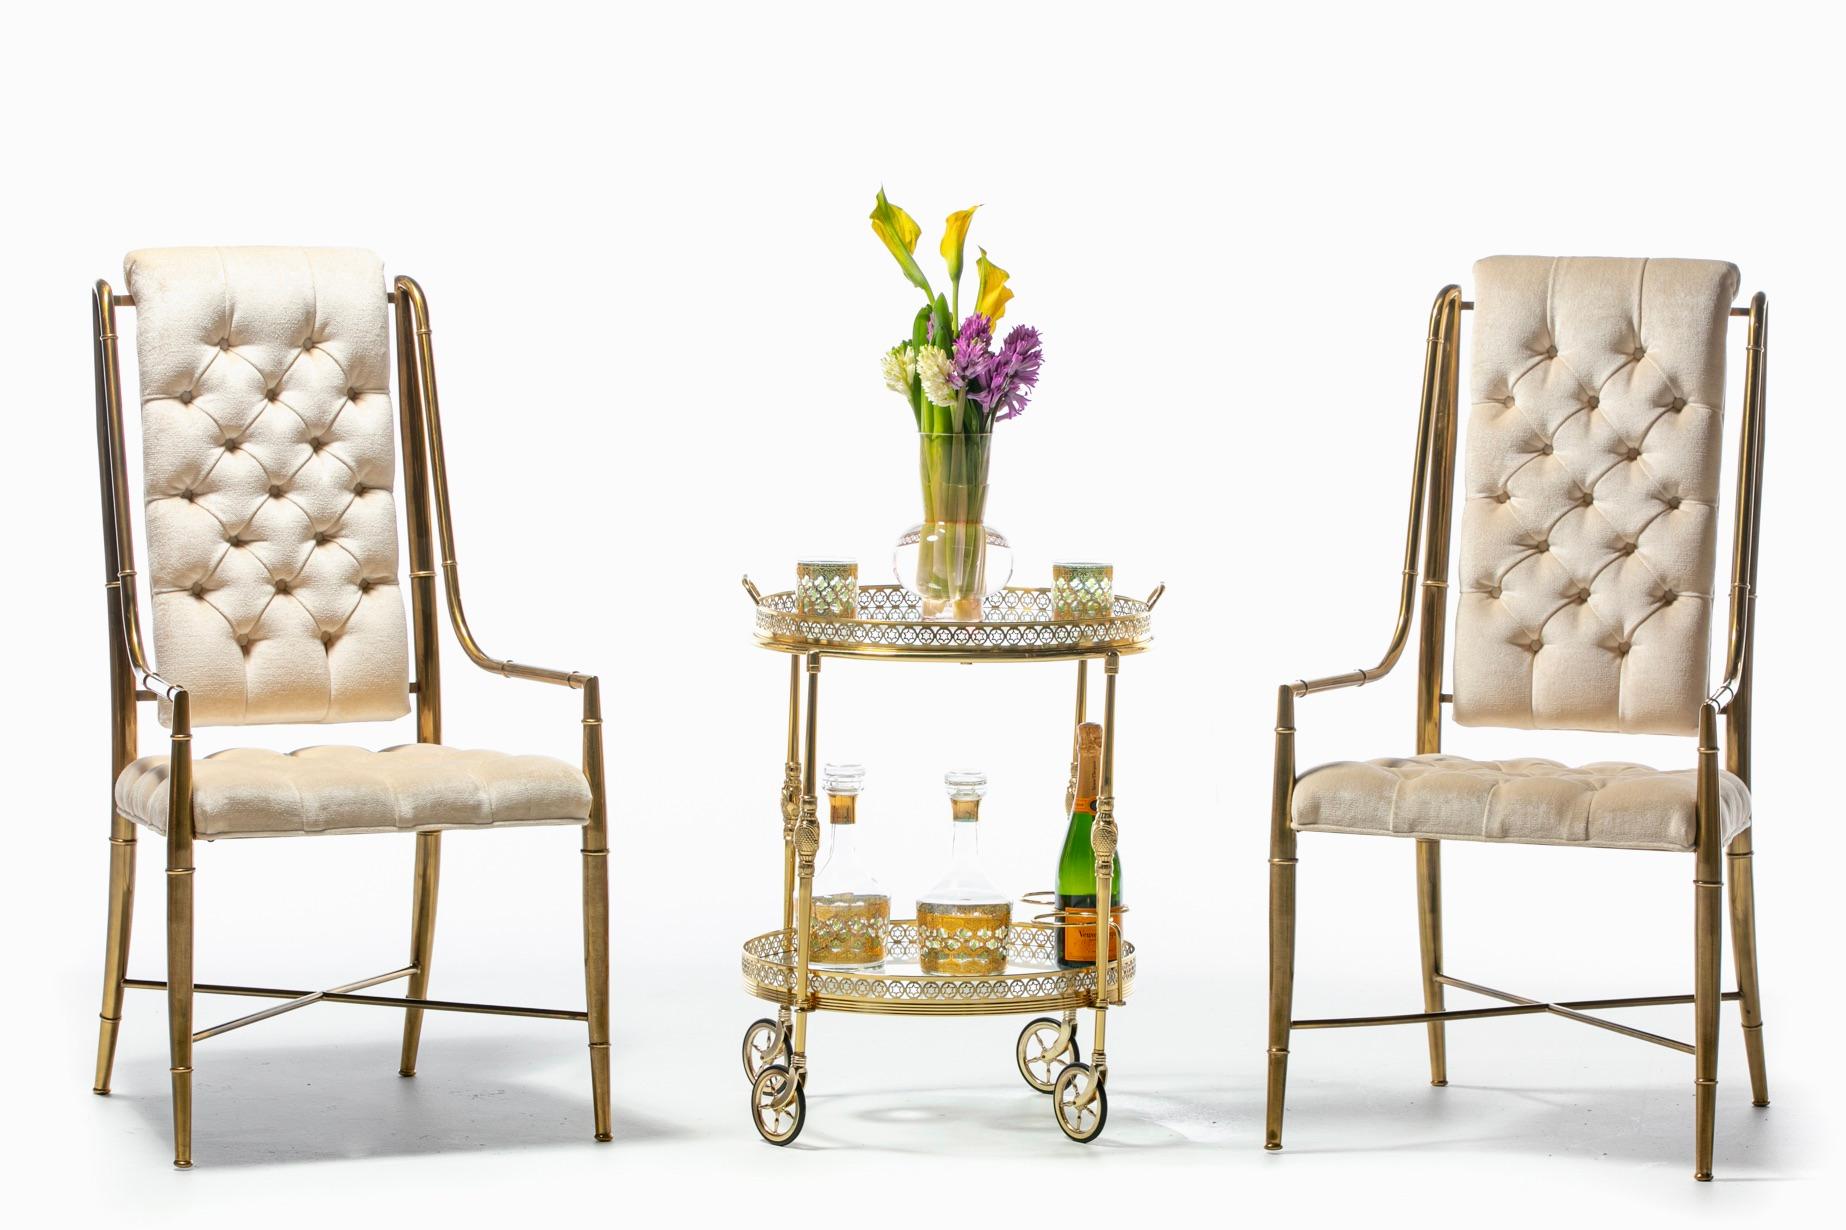 Roll into cocktail hour in style with this chic French 1960s Hollywood Regency Maison Jansen / Maison Baguès attributed brass bar cart. Glamorous. Ornate. Festive. The details. Two tiers both with glass shelves surrounded by pierced brass galleries